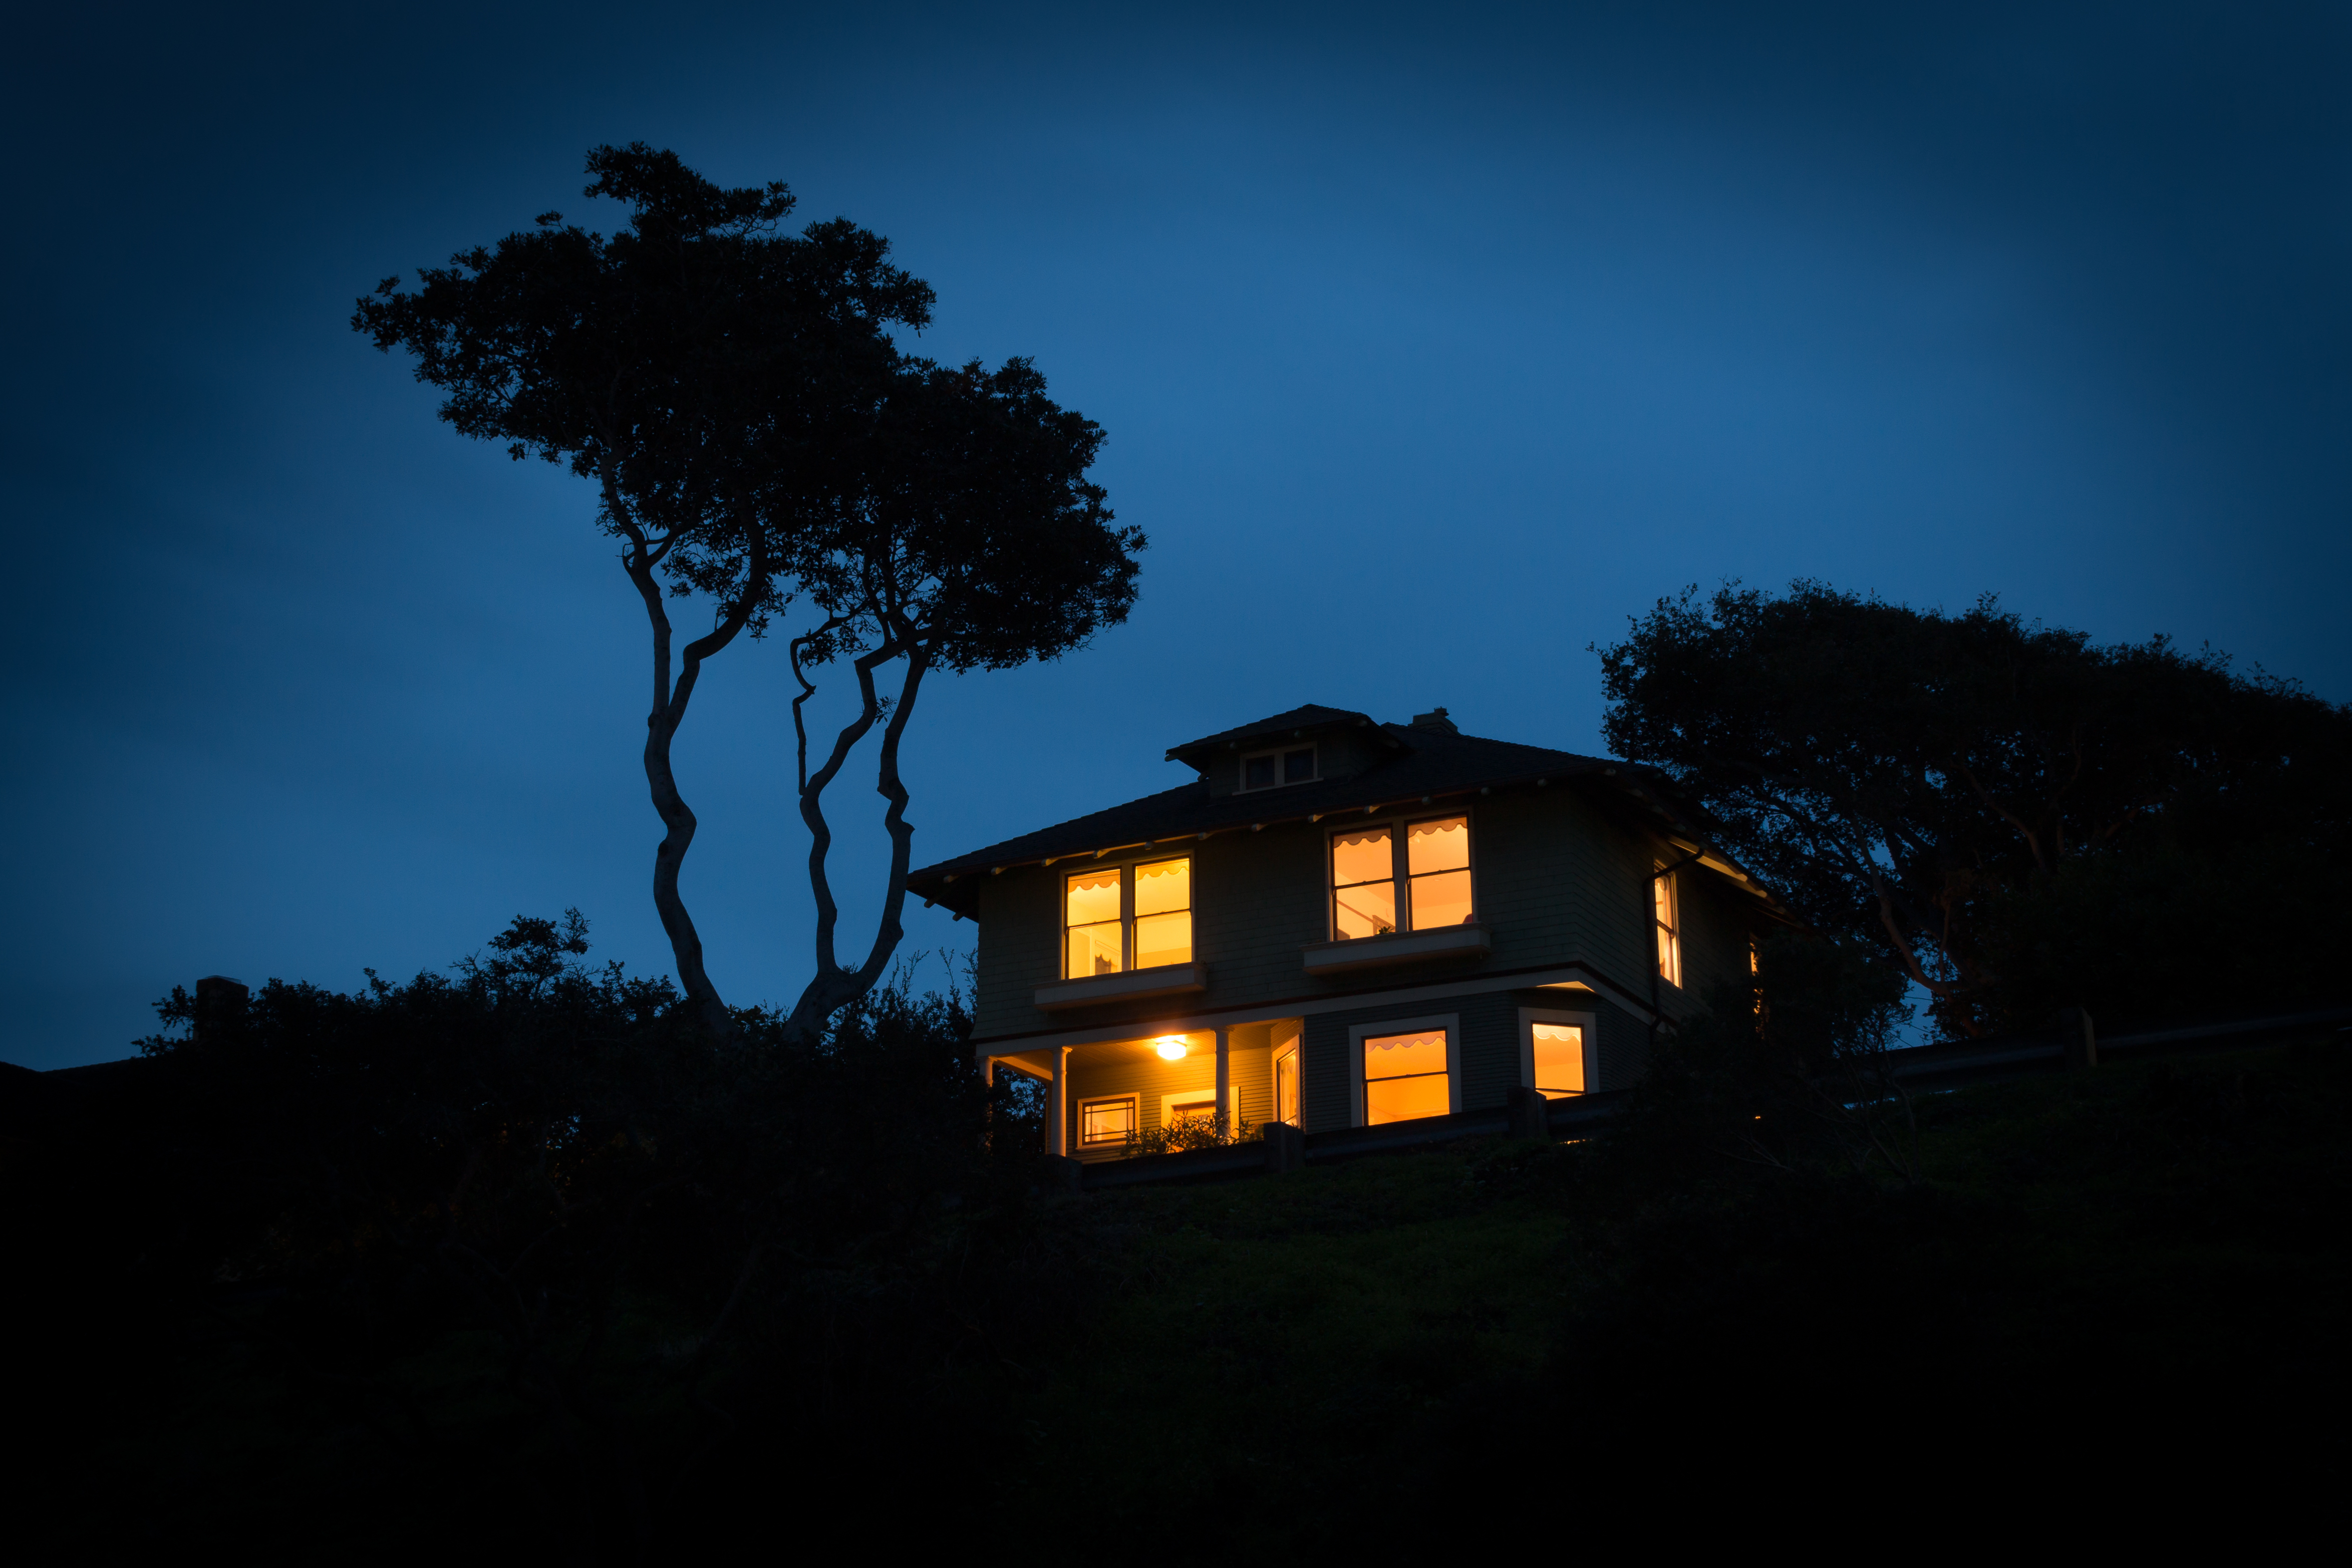 A lone house at night. | Source: Shutterstock